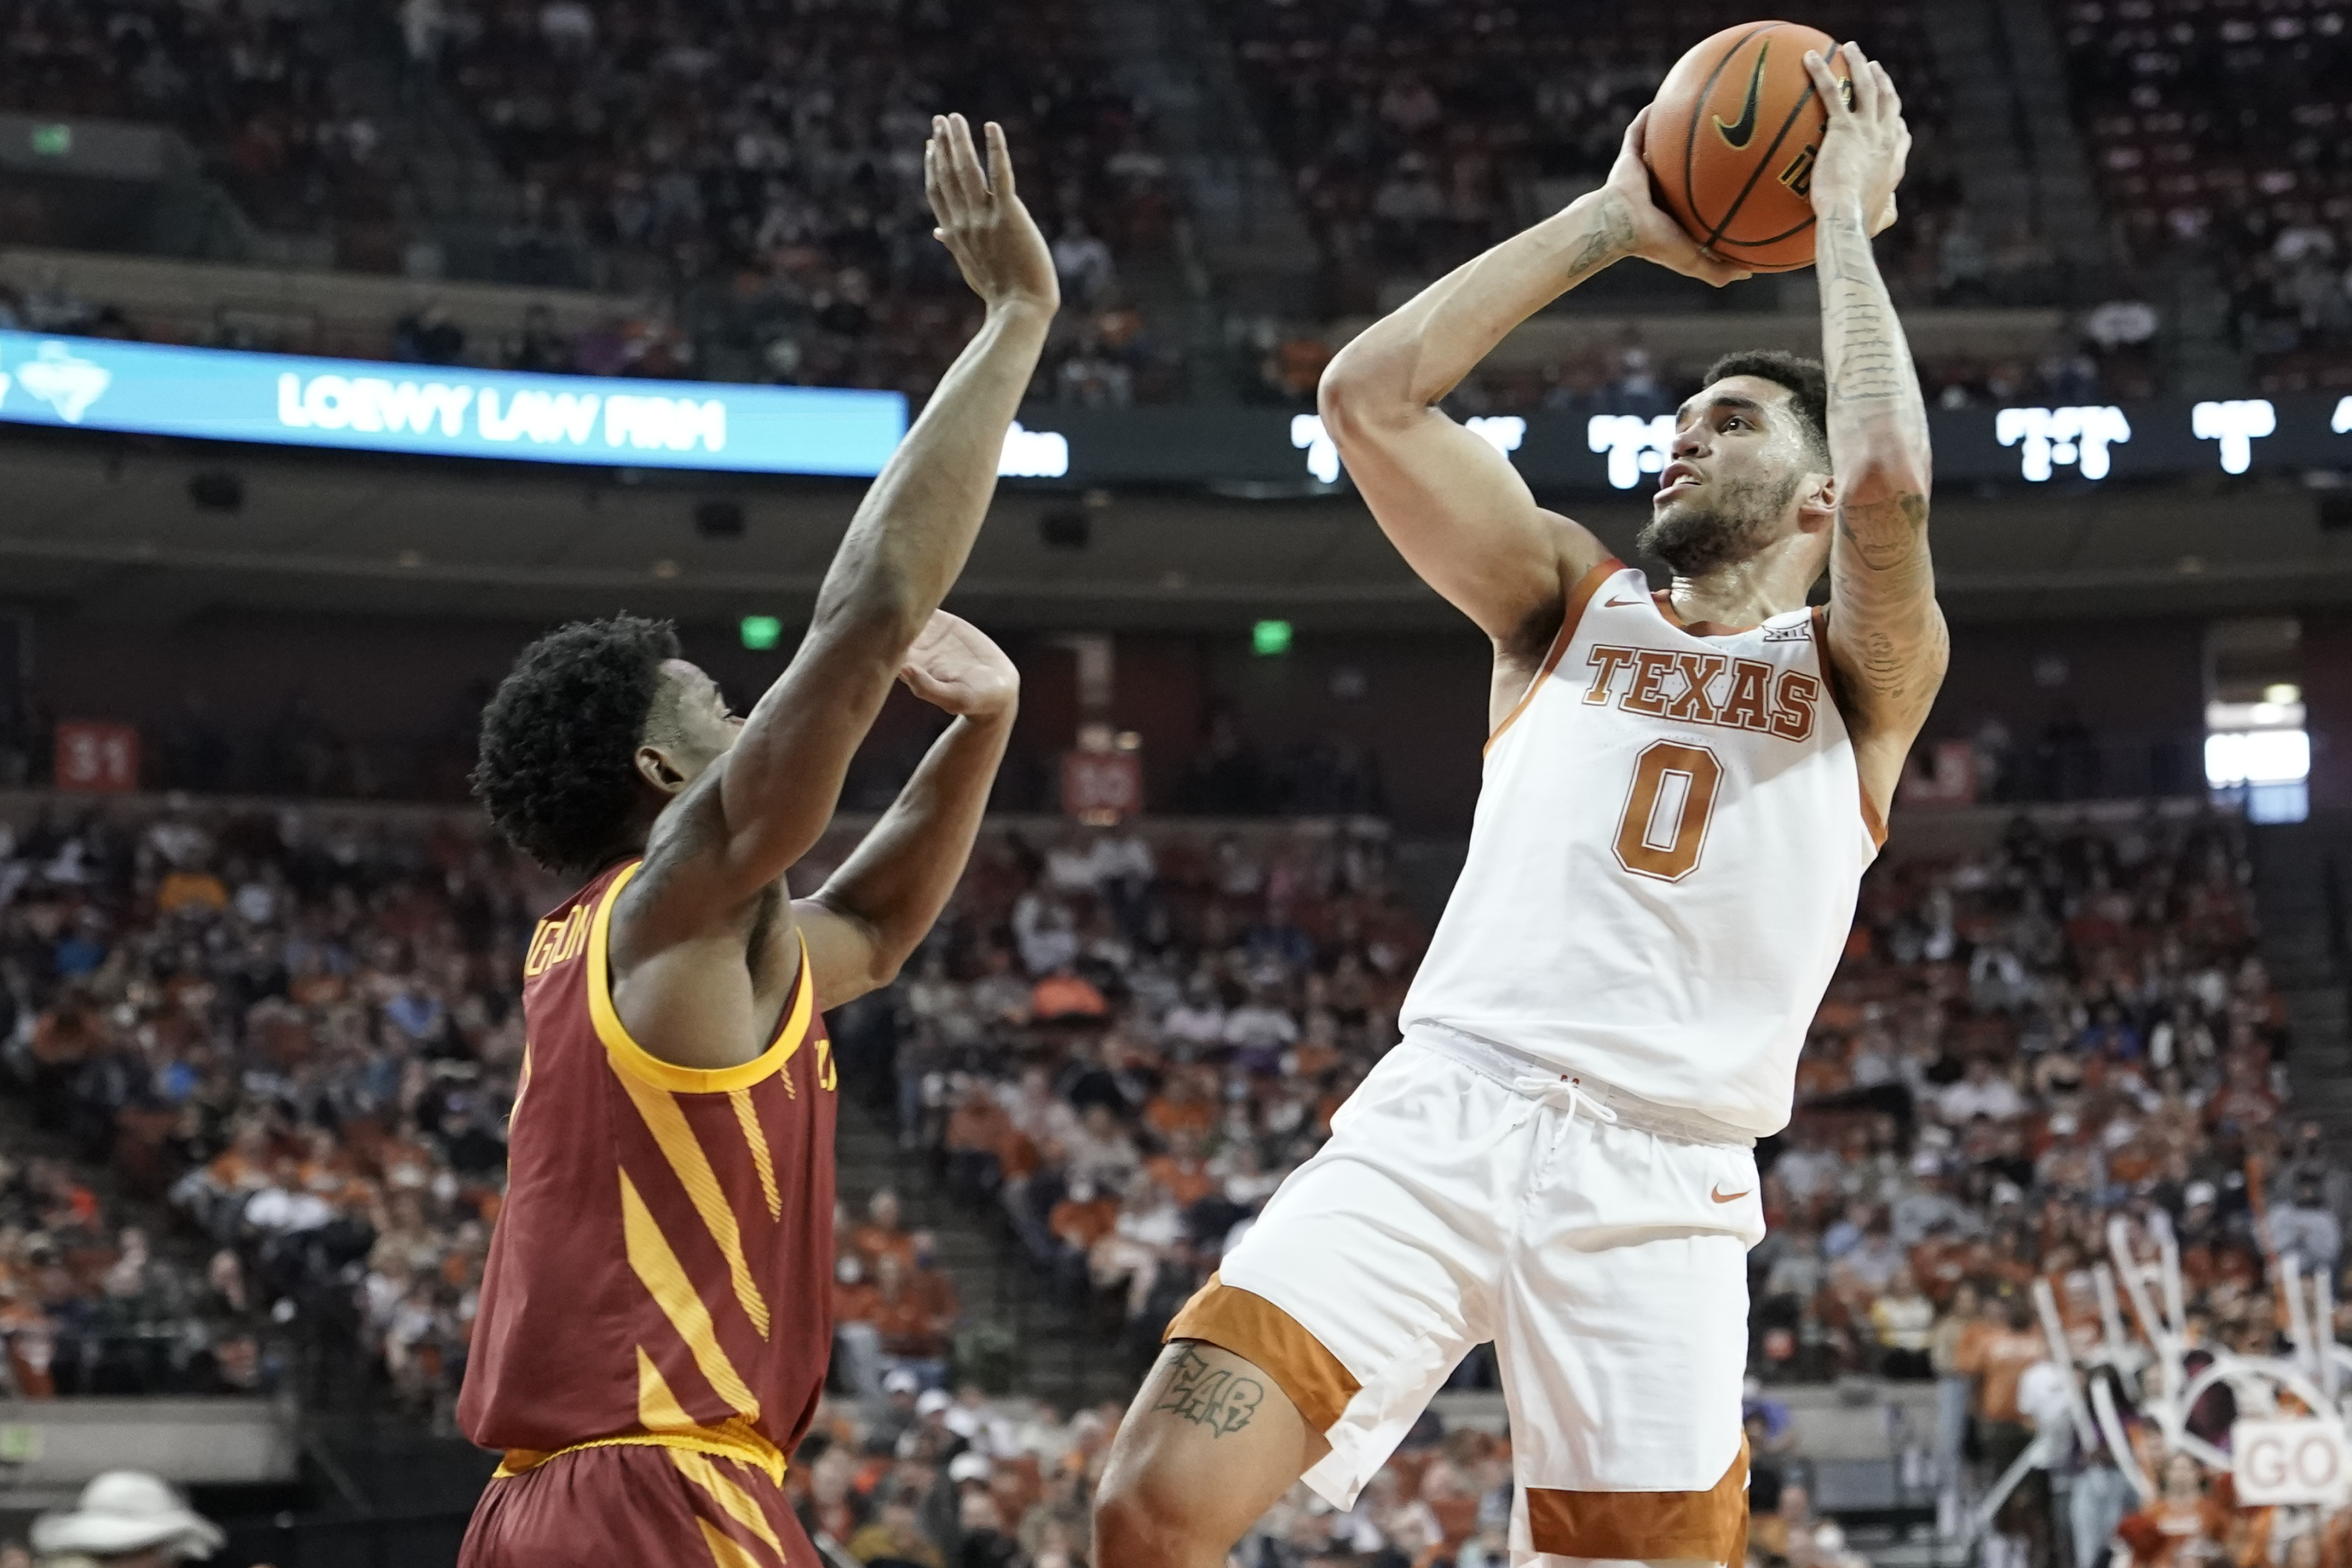 How to watch Texas basketball vs